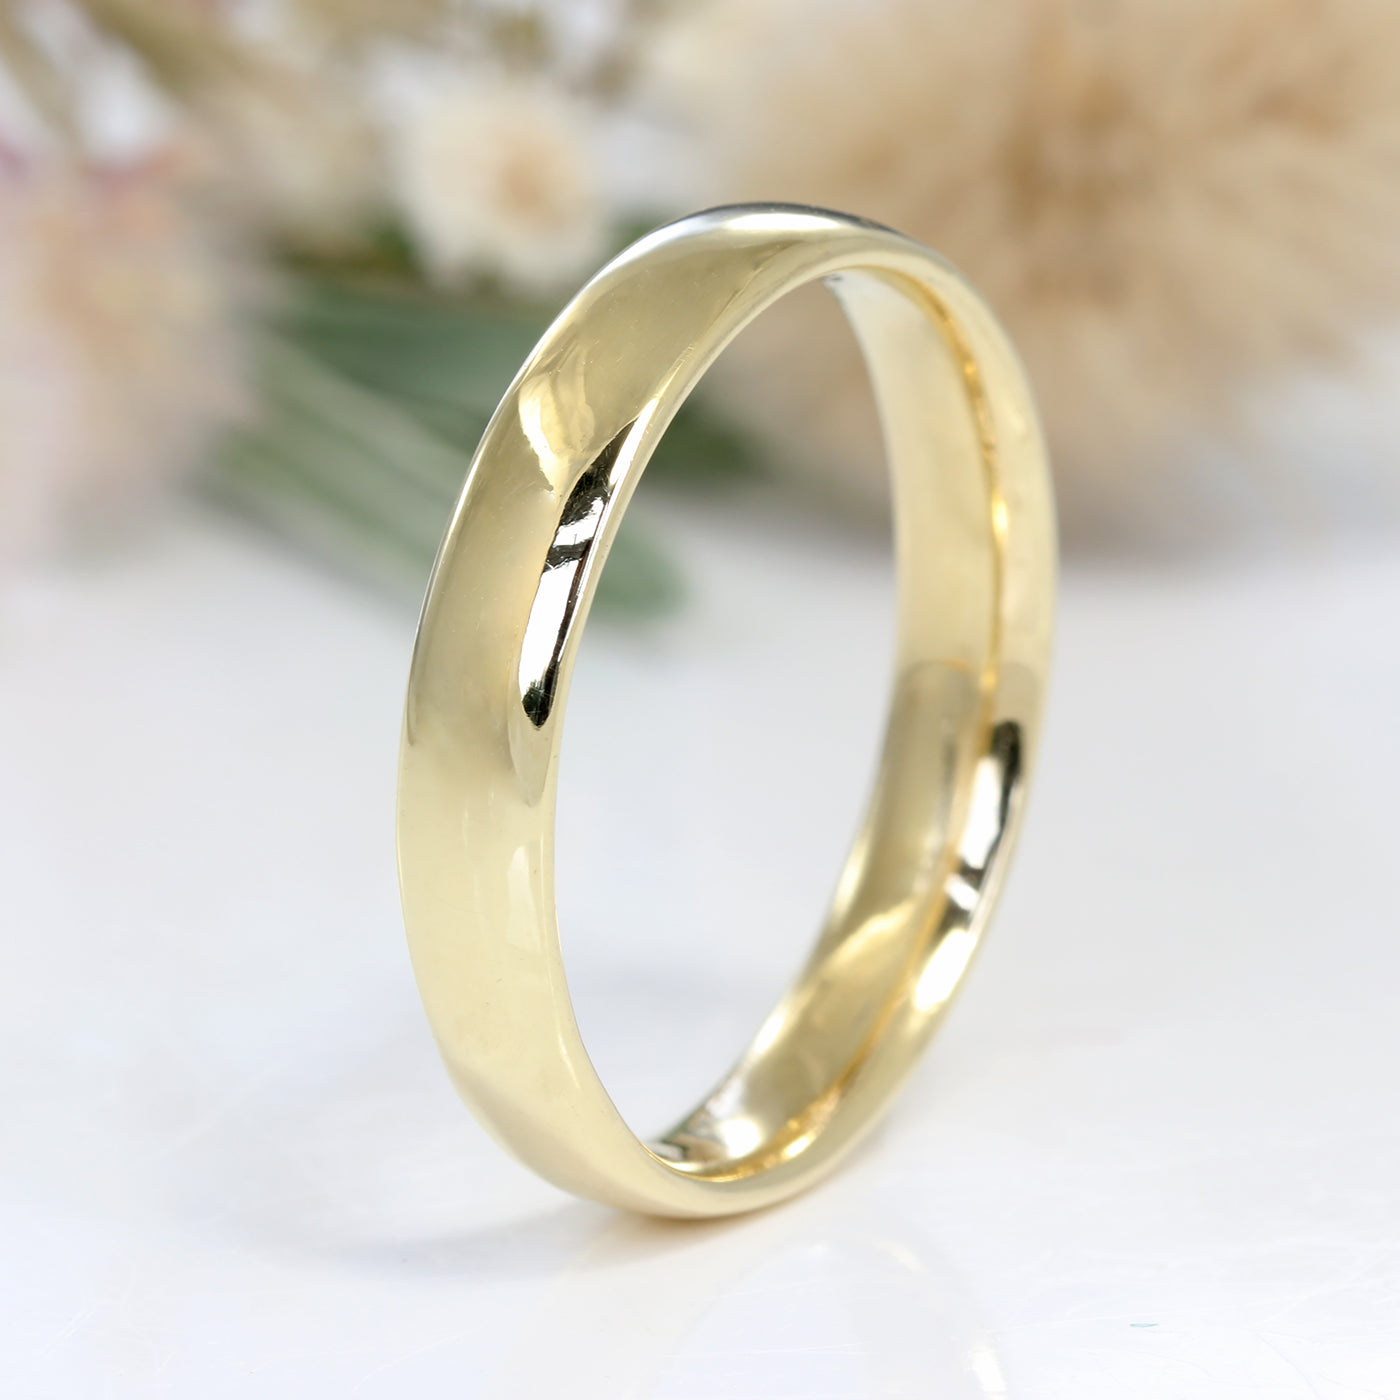 4mm 18ct Yellow Gold Comfort Fit Wedding Ring - Size S (Resize G - S 1/2)